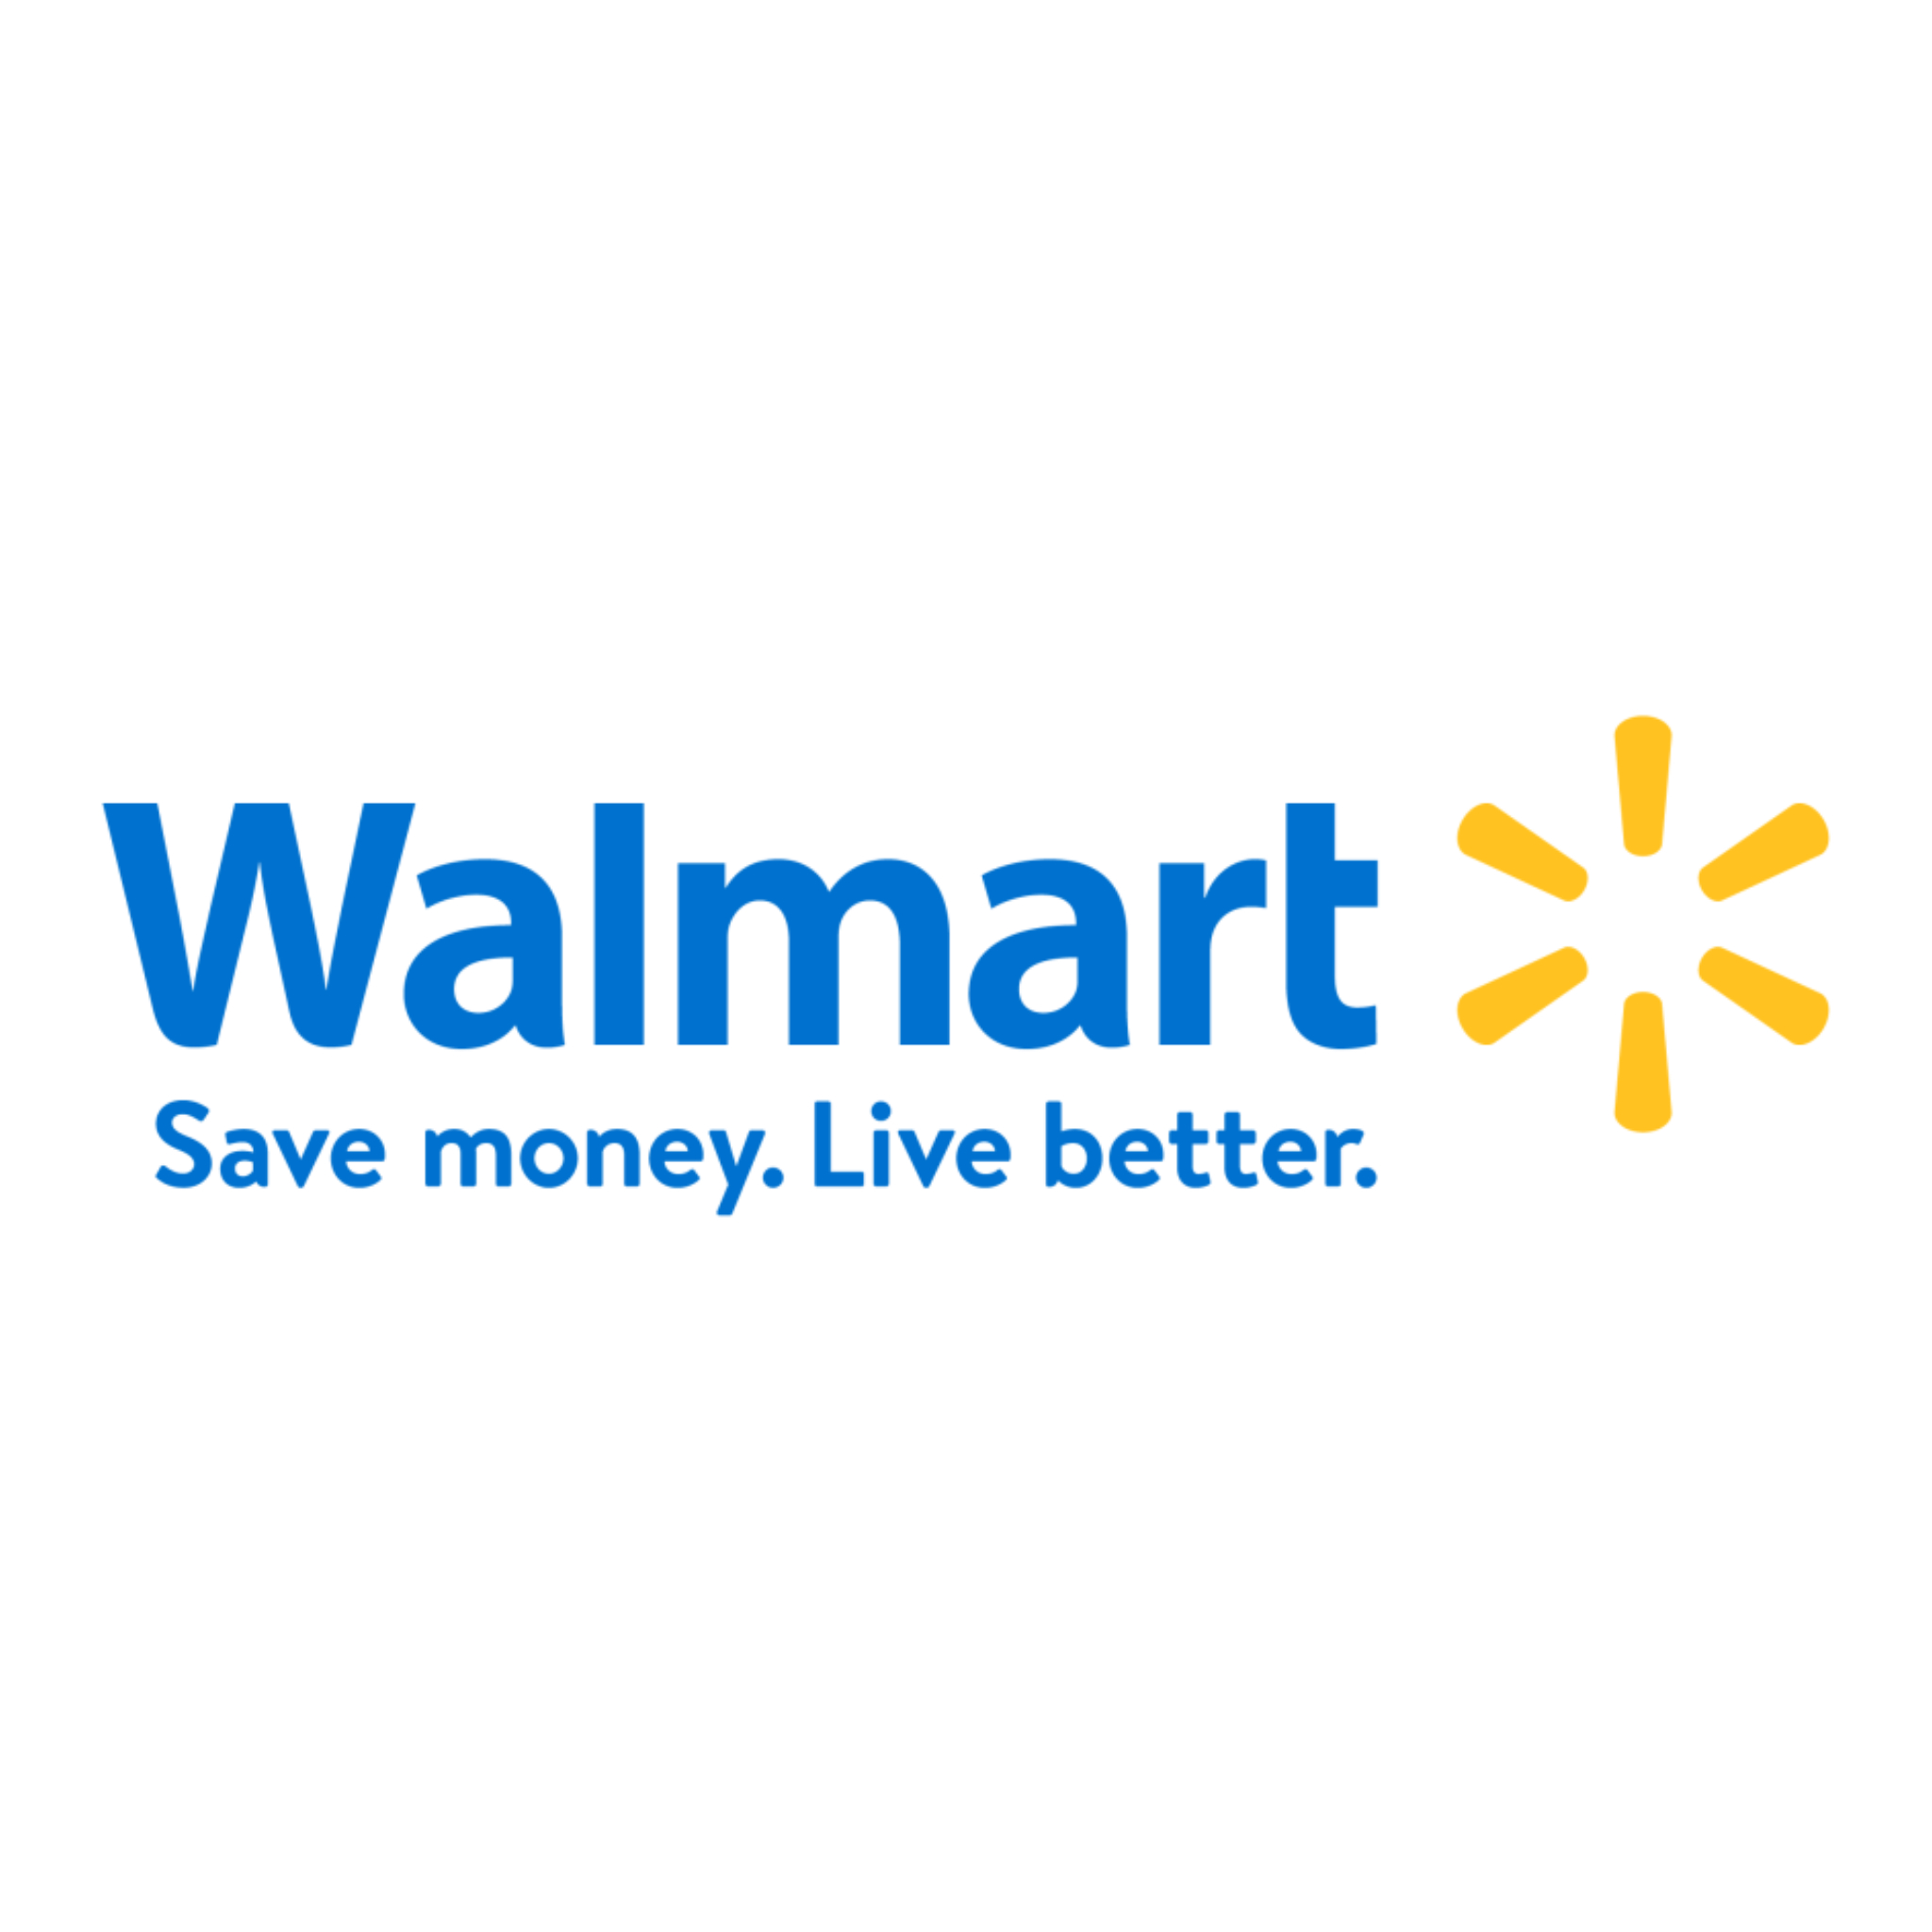 Converge @ Walmart is back to reimagine retail tech!-thumnail